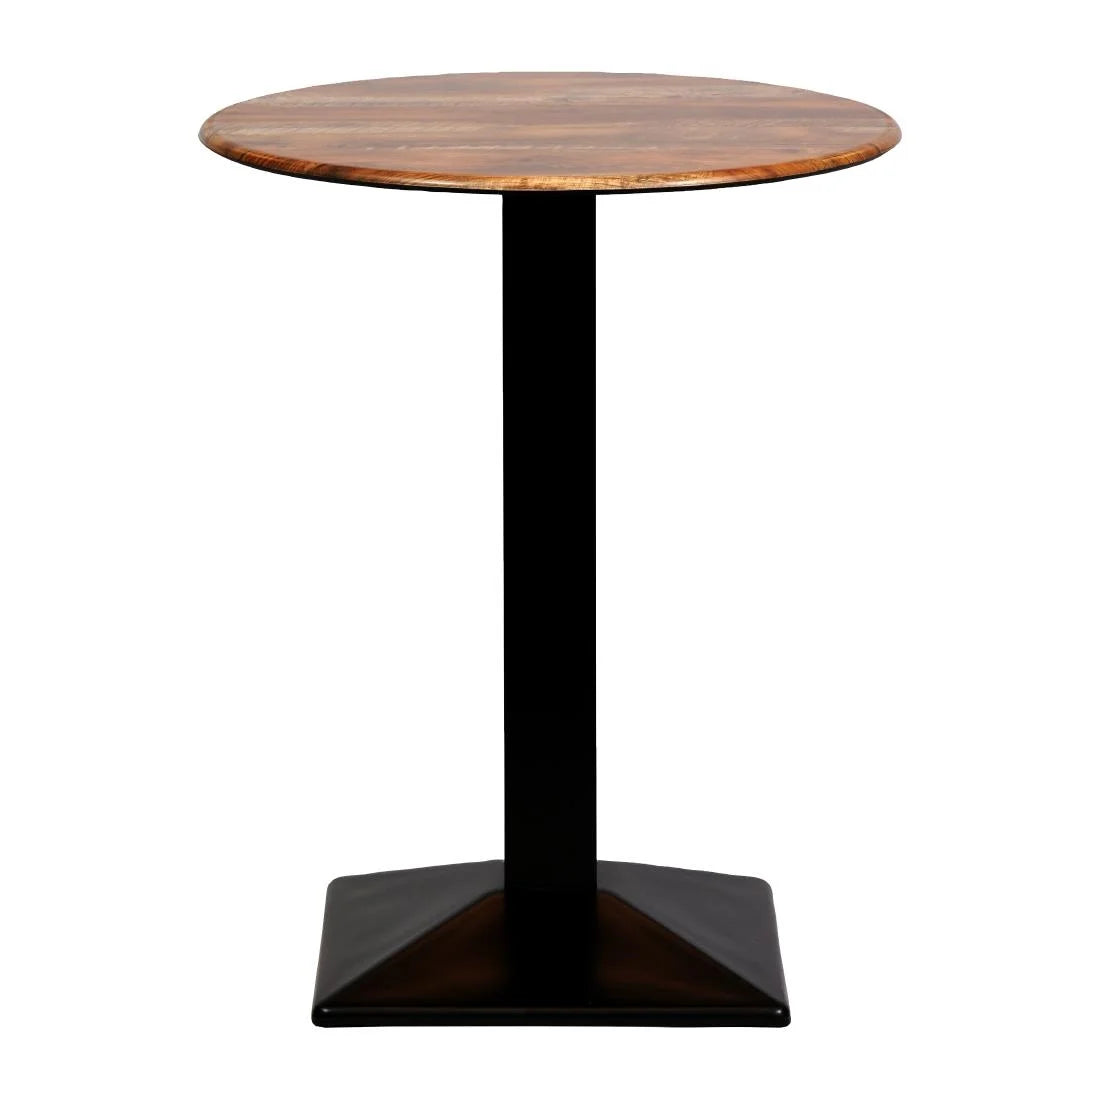 CZ836 Turin Metal Base Round Poseur Table with Laminate Top Planked Oak 600mm JD Catering Equipment Solutions Ltd